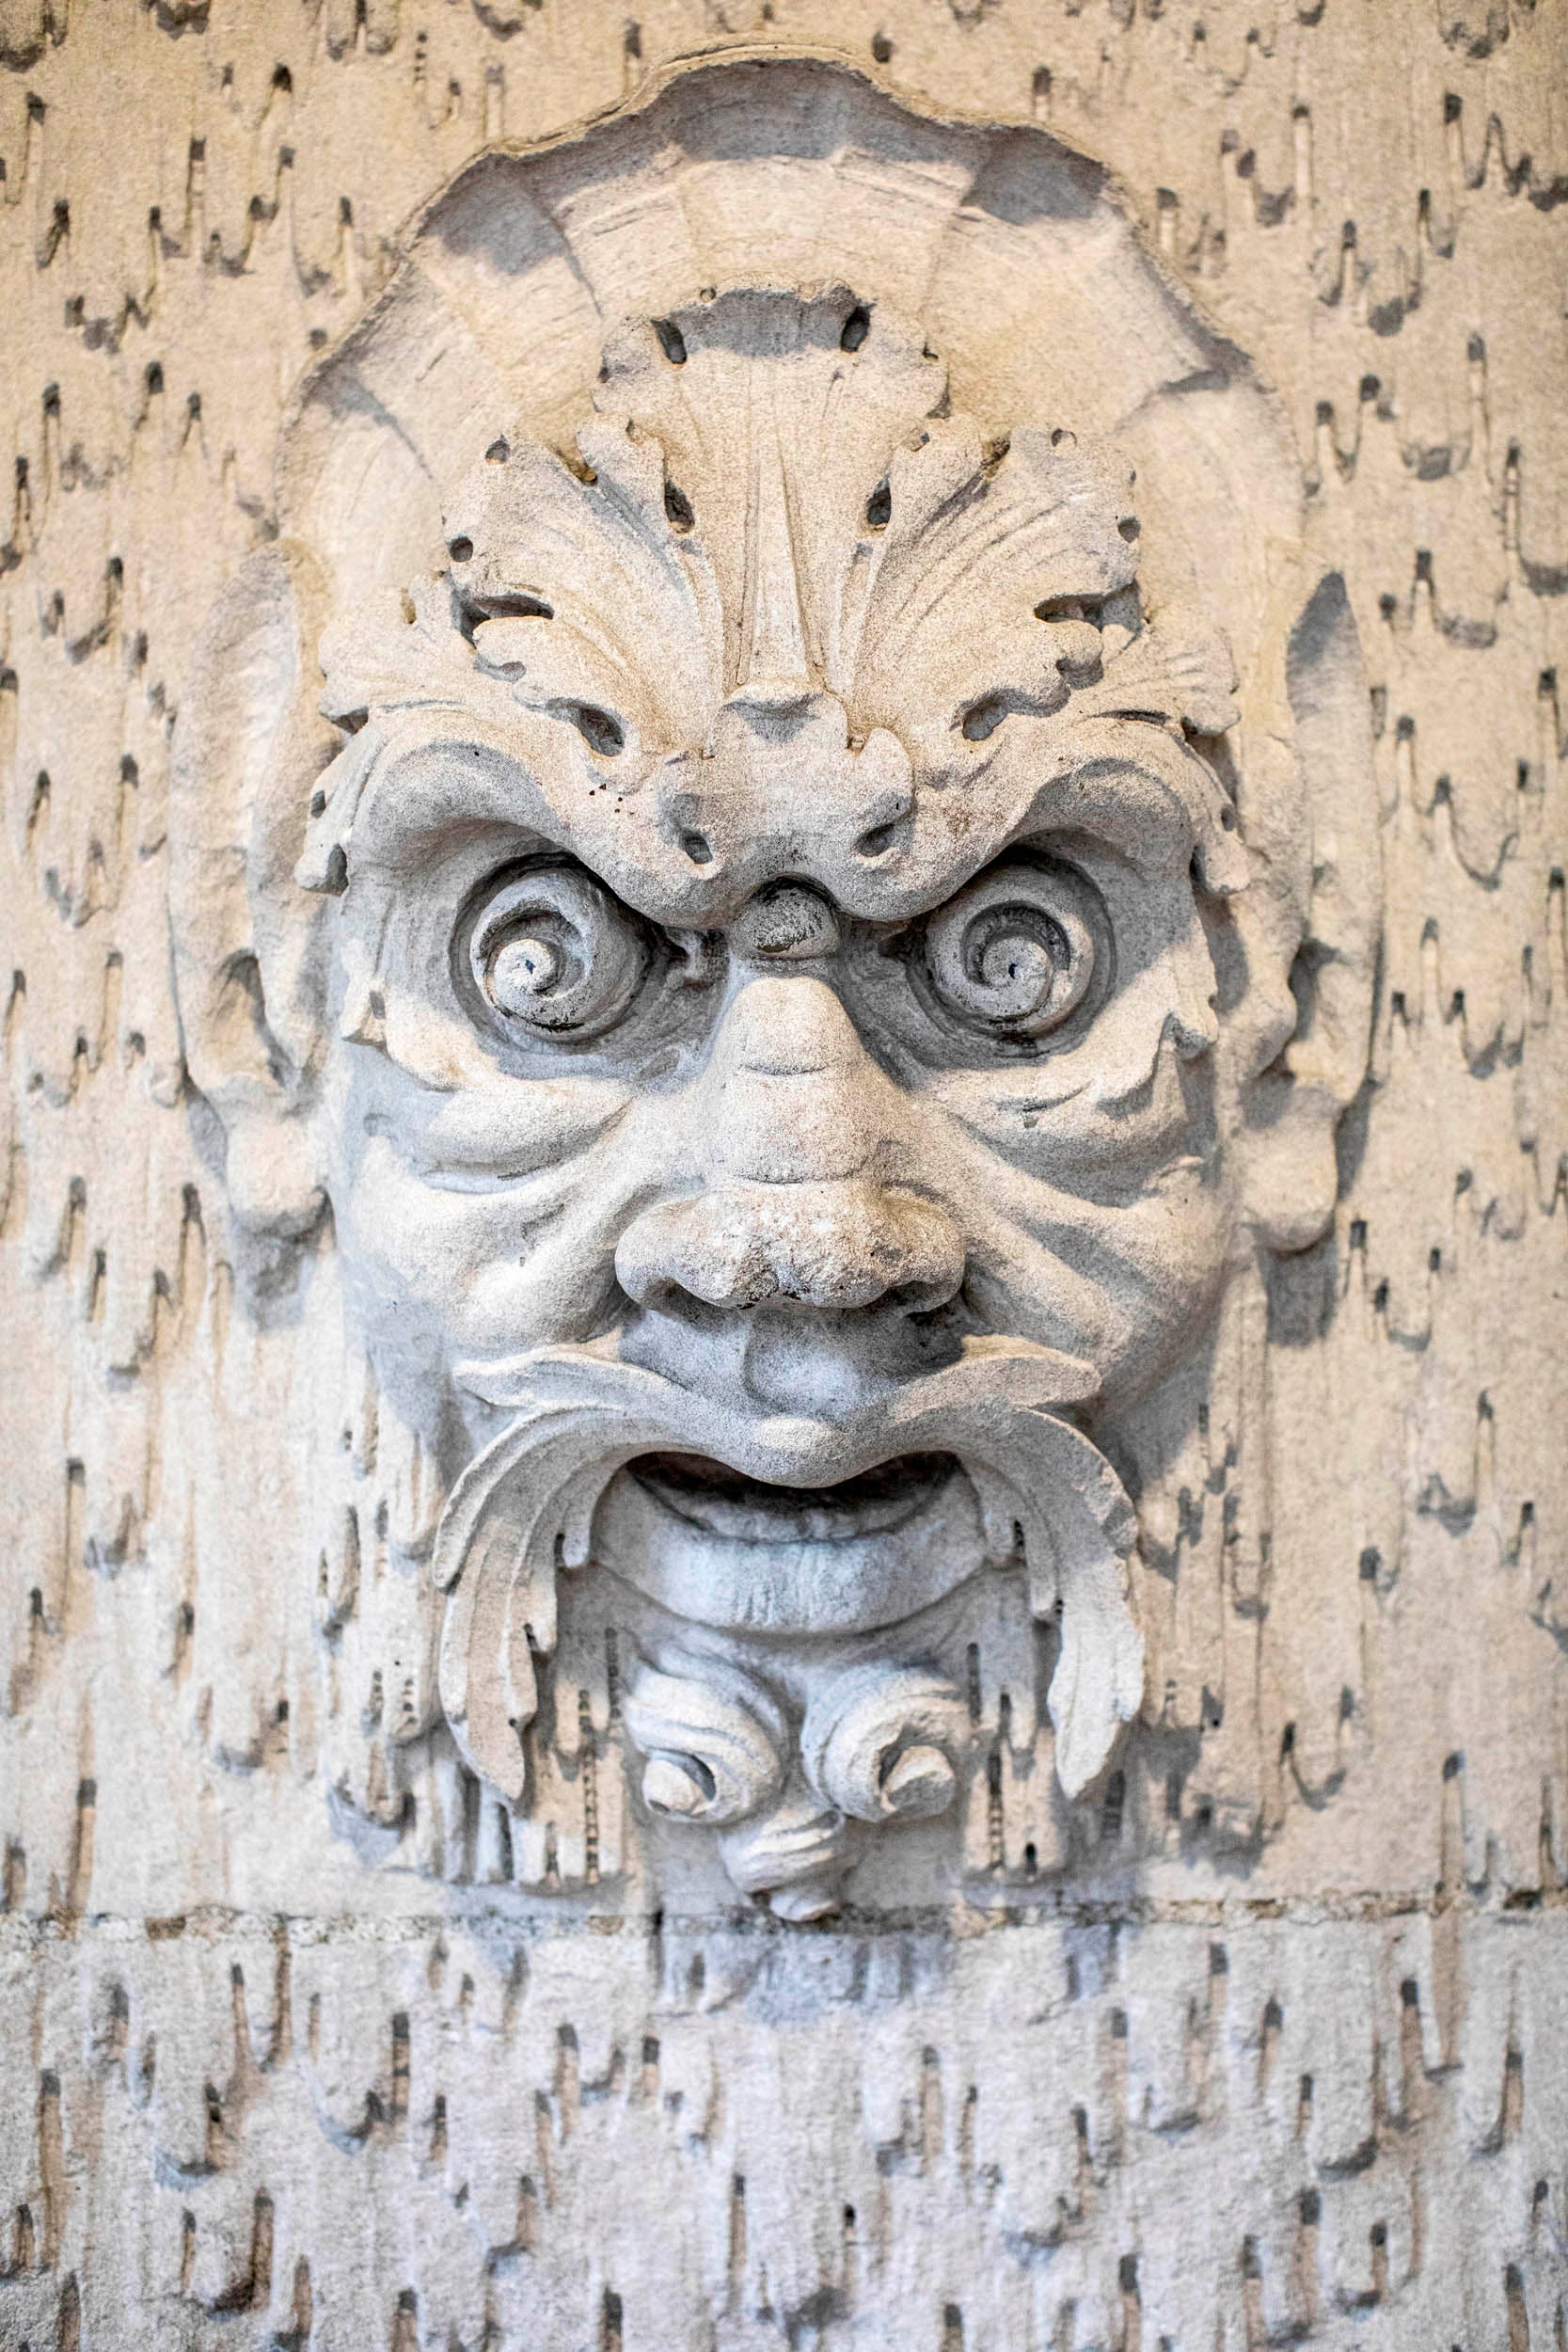 A faced carved in stone greets visitors at Randolph Hall’s Westmorly Court entrance.